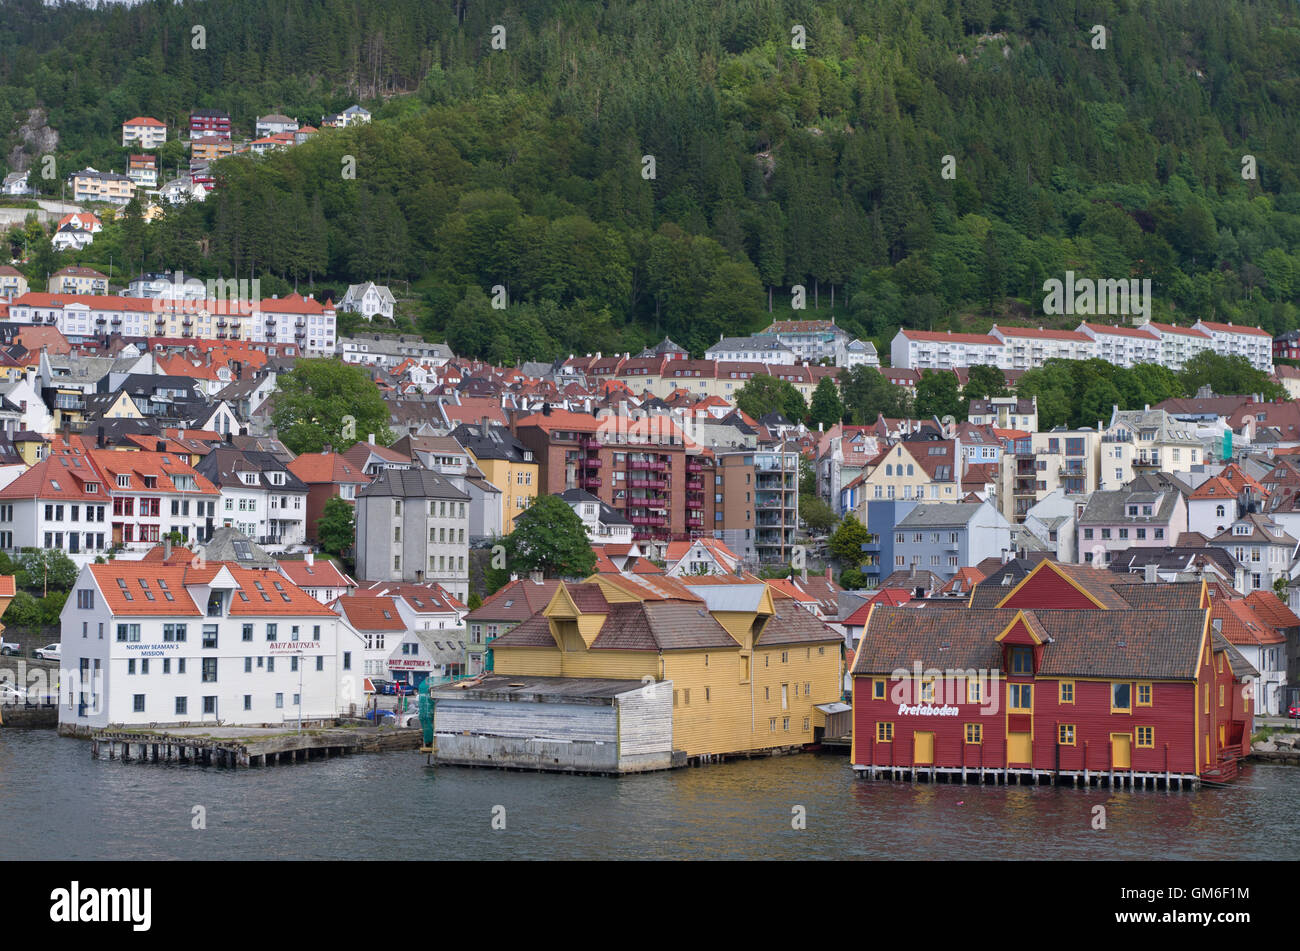 The view from the deck of the cruise ship Arcadia over the colourful house of Bergen, Norway. Stock Photo